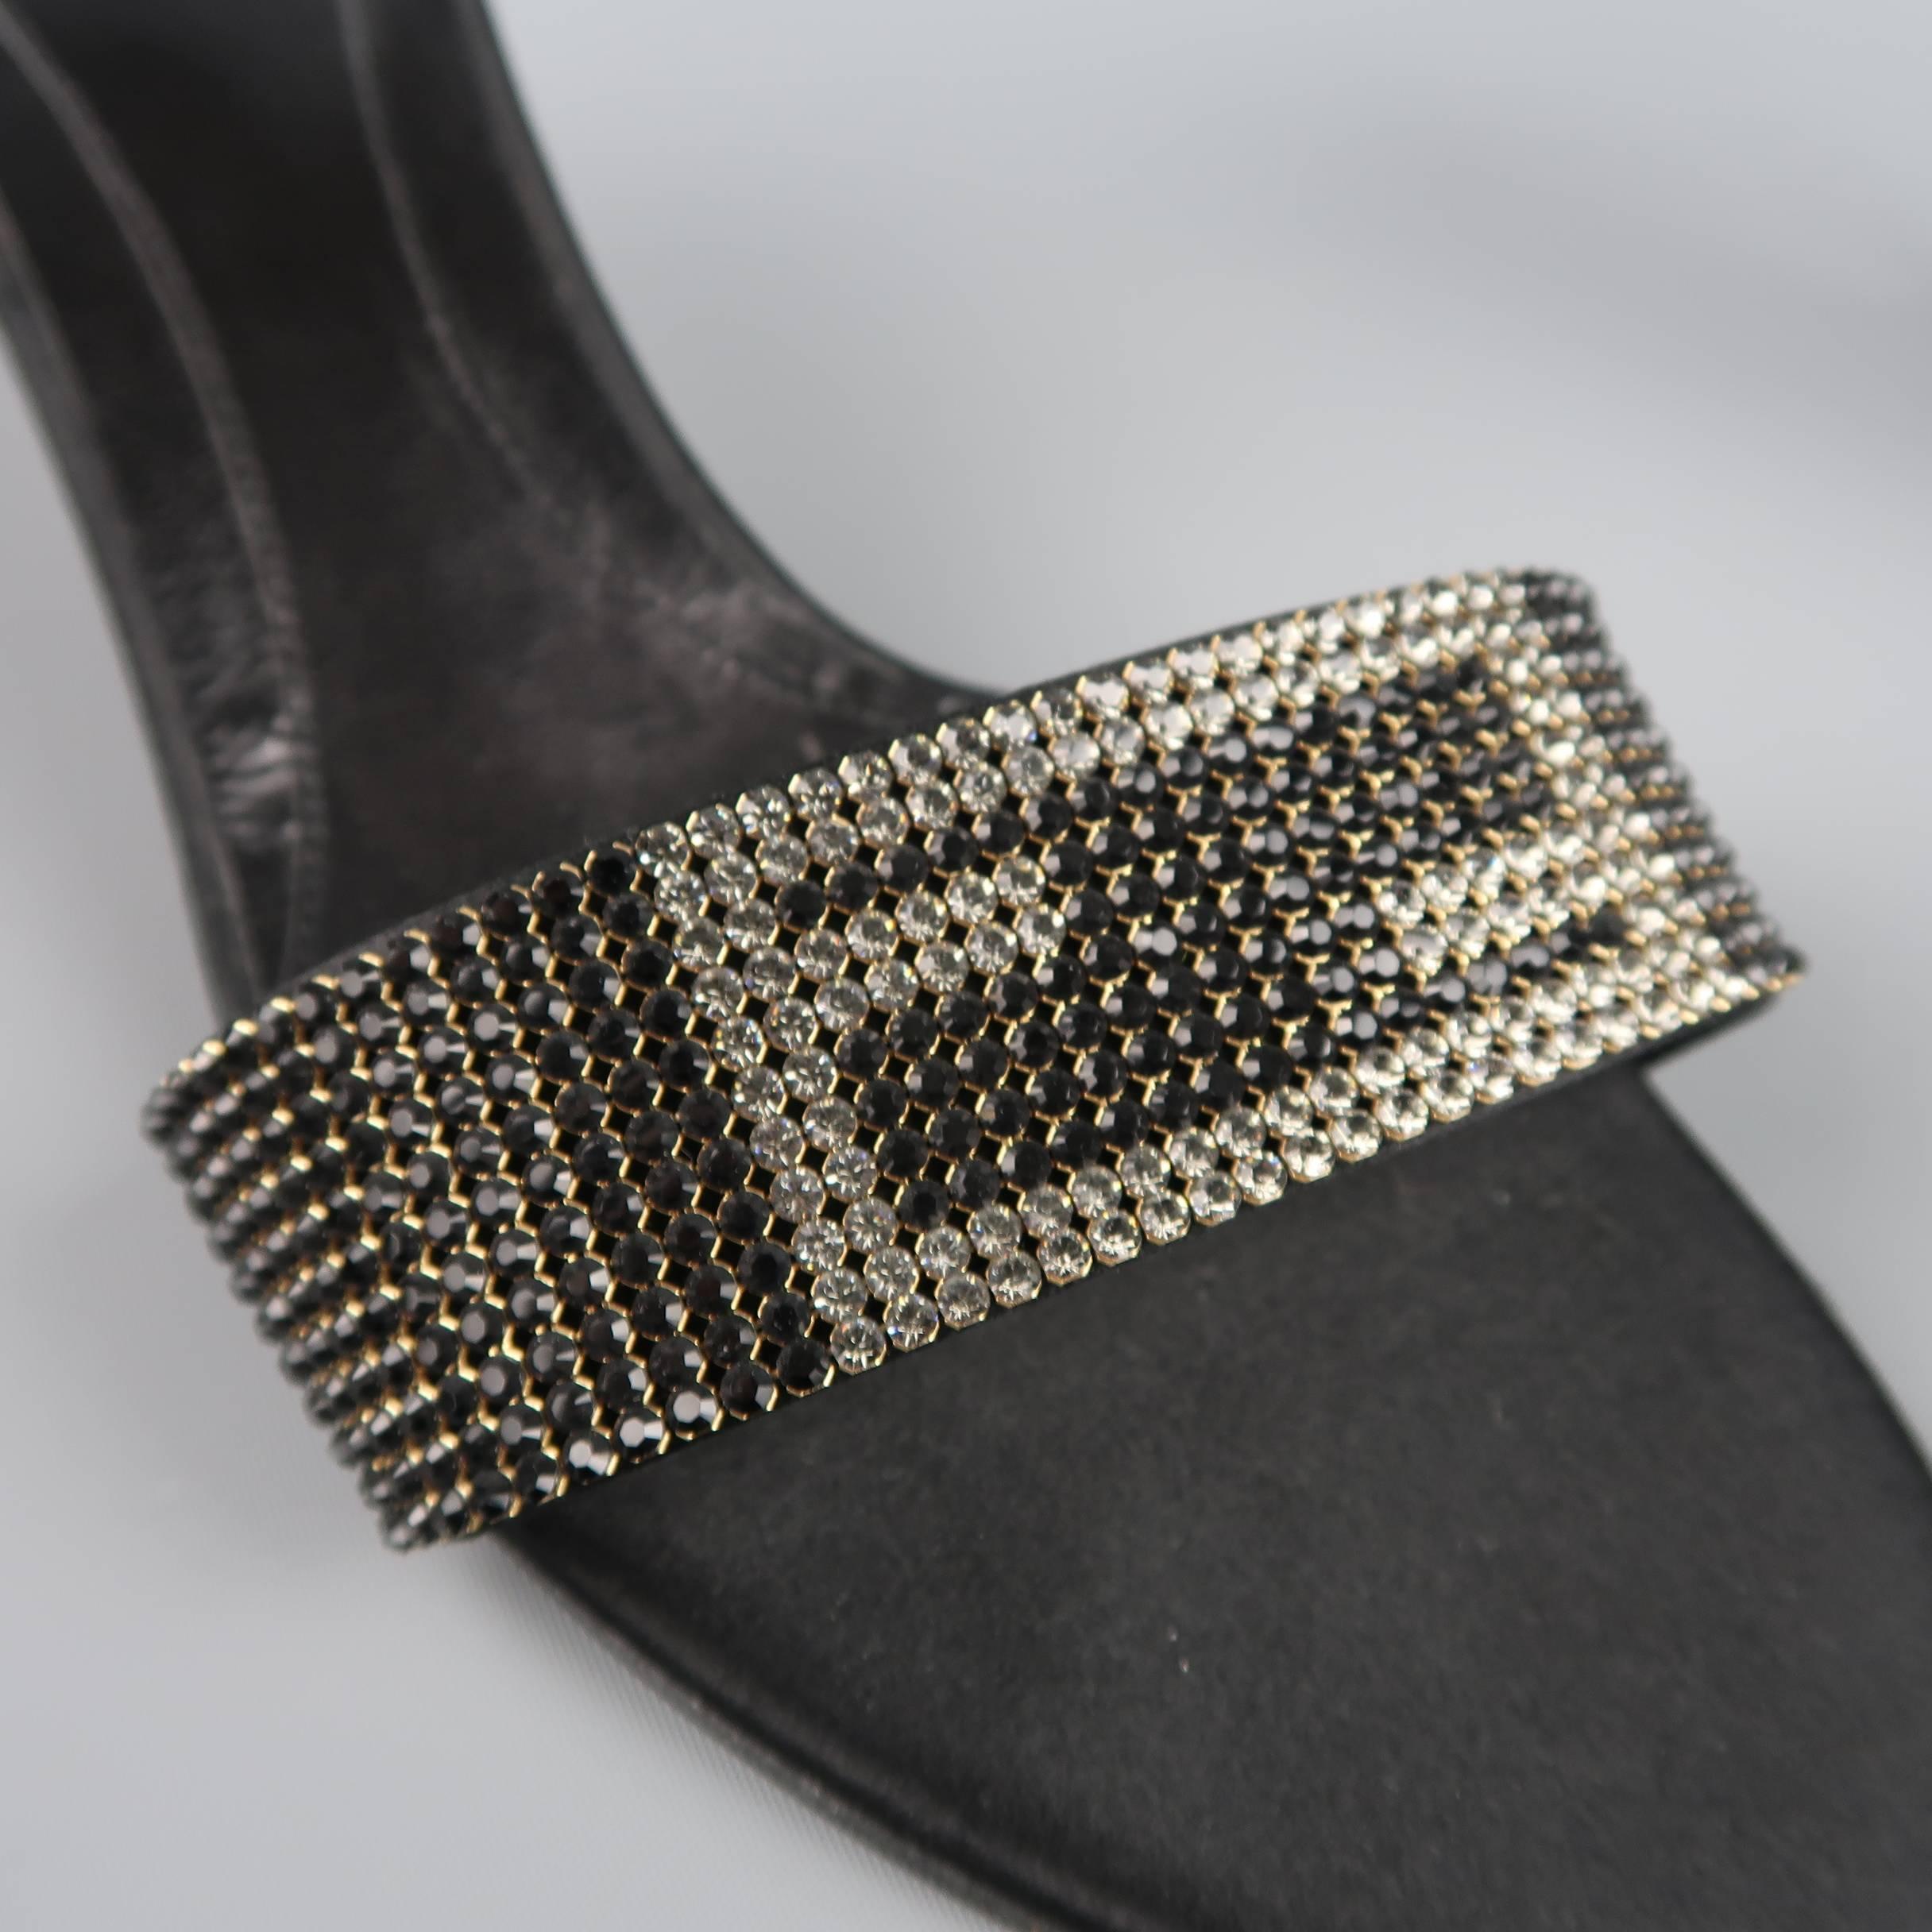 Archive FENDI mules feature a black silk satin and leather sole, silk covered kitten heel, and thick strap with black and silver rhinestone logo. Made in Italy.
 
Excellent Pre-Owned Condition.
Marked: IT 39.5
 
Measurements:
 
Heel: 2.75

SKU: 86821